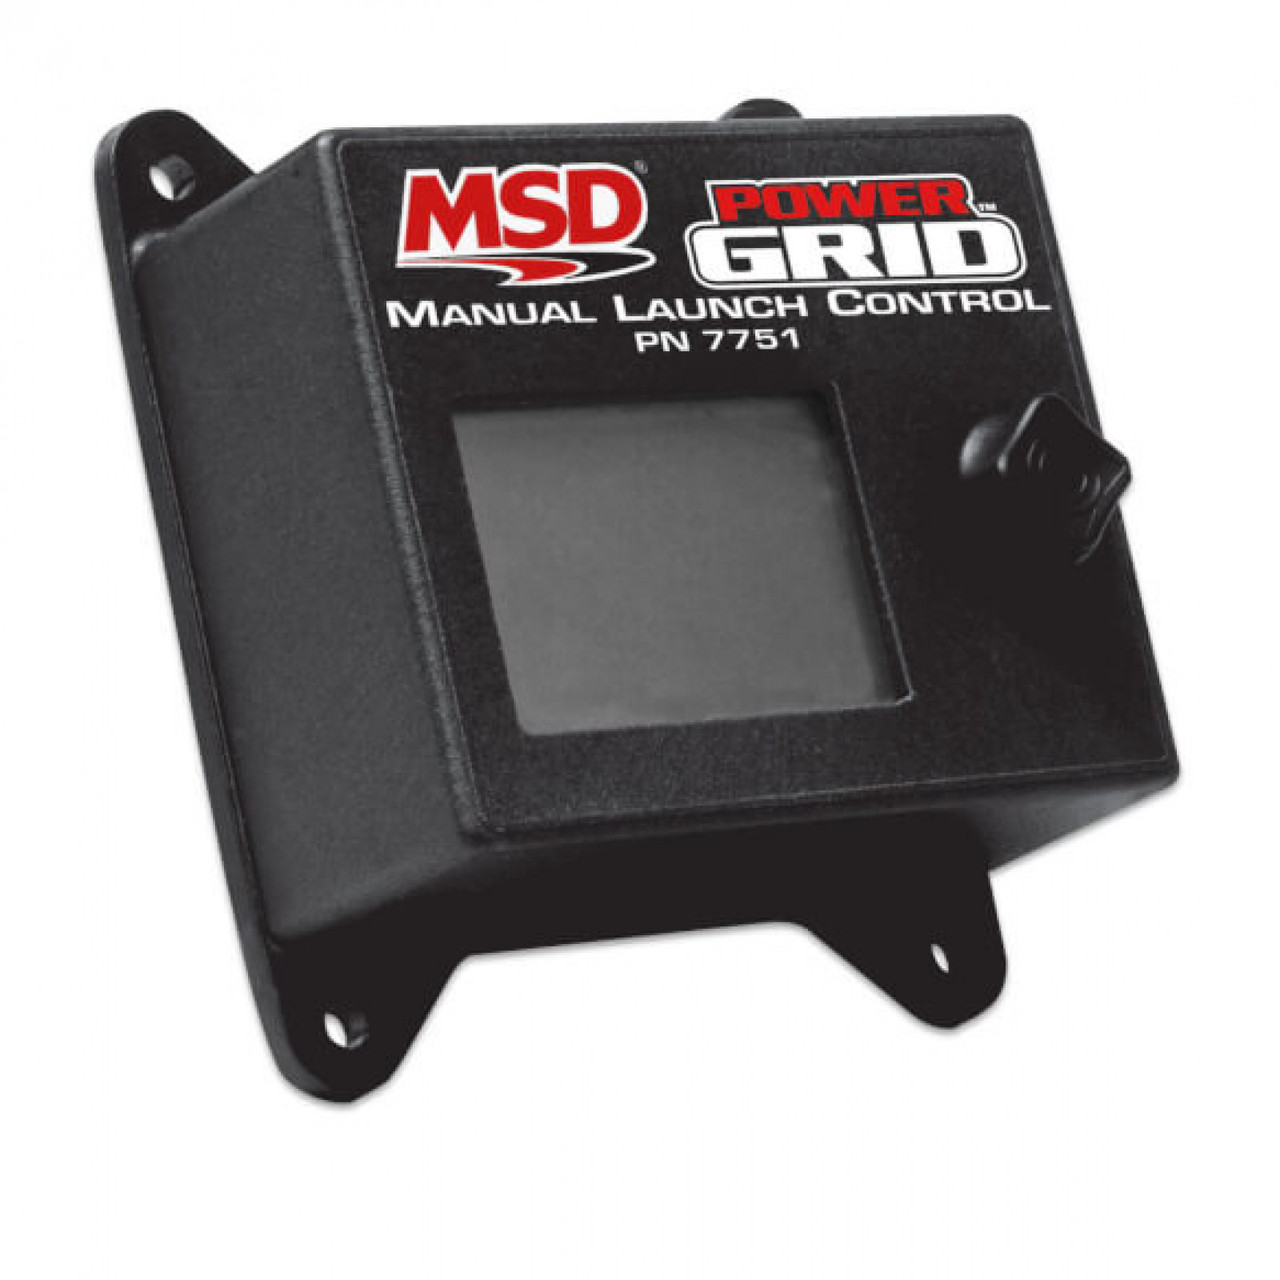 MSD Manual Launch Control Module for Power Grid System (MSD-27751)